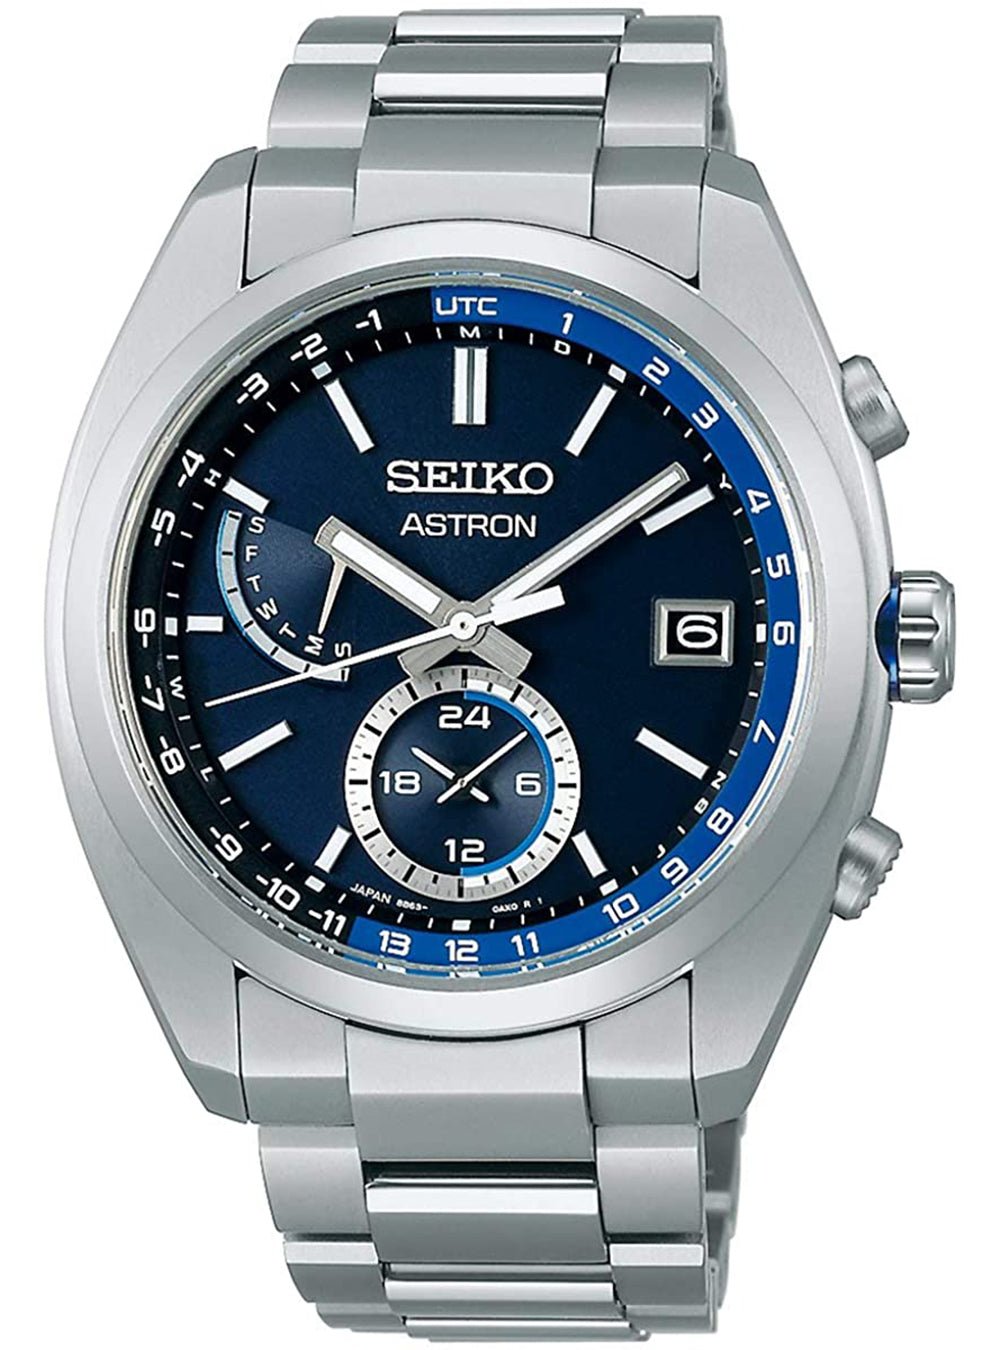 SEIKO ASTRON SBXY013 MADE IN JAPAN JDMWRISTWATCHjapan-select